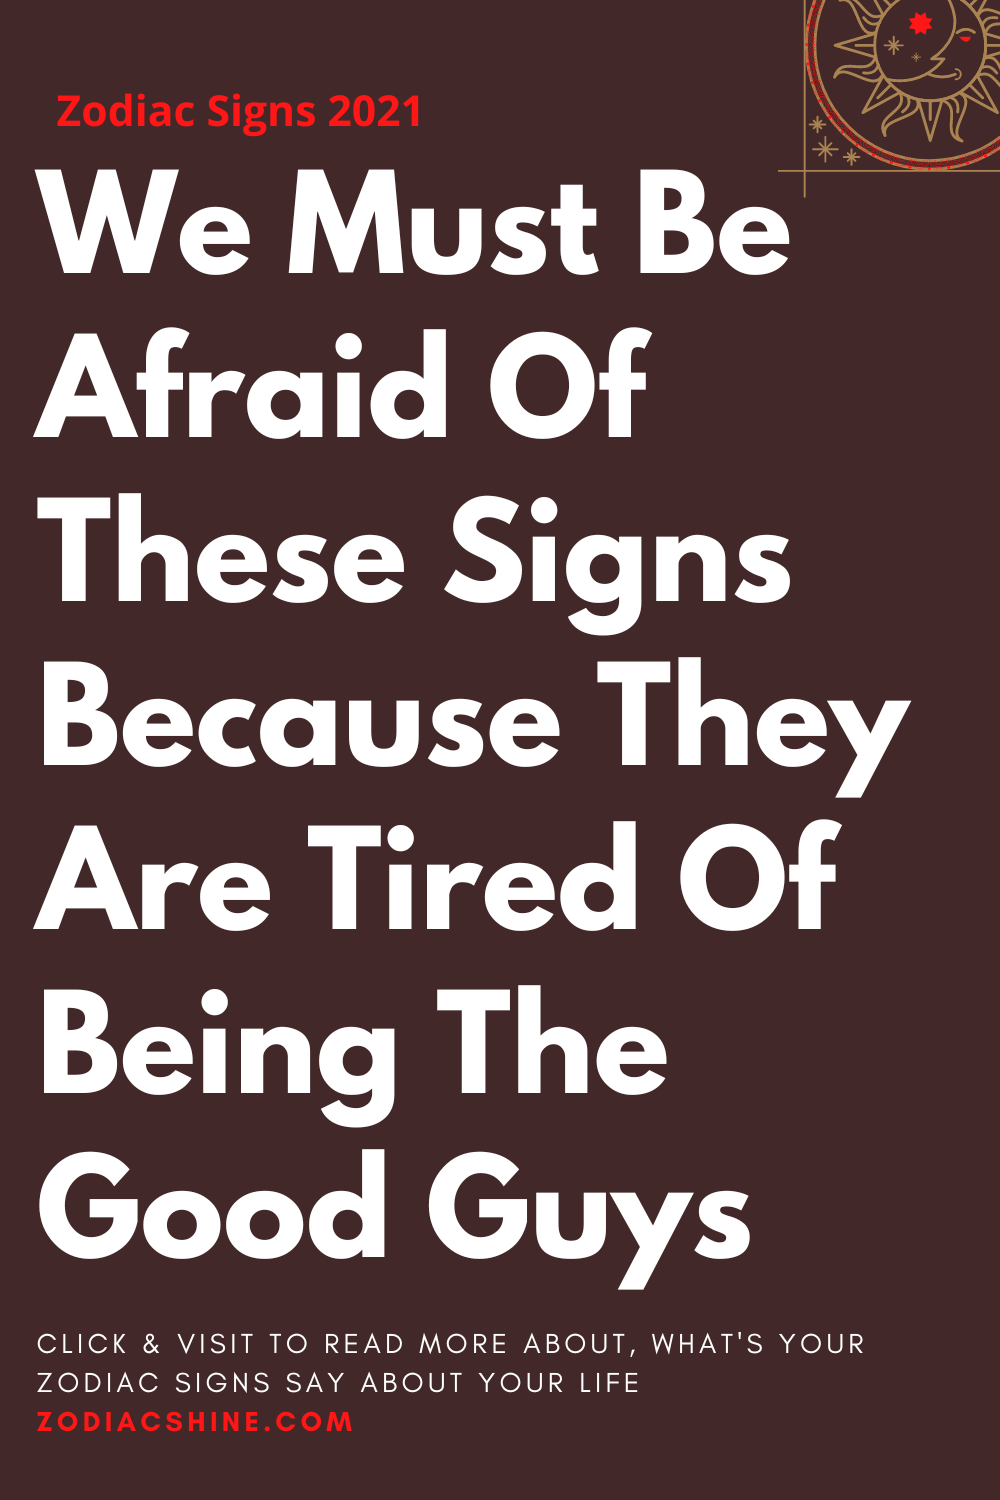 We Must Be Afraid Of These Signs Because They Are Tired Of Being The Good Guys